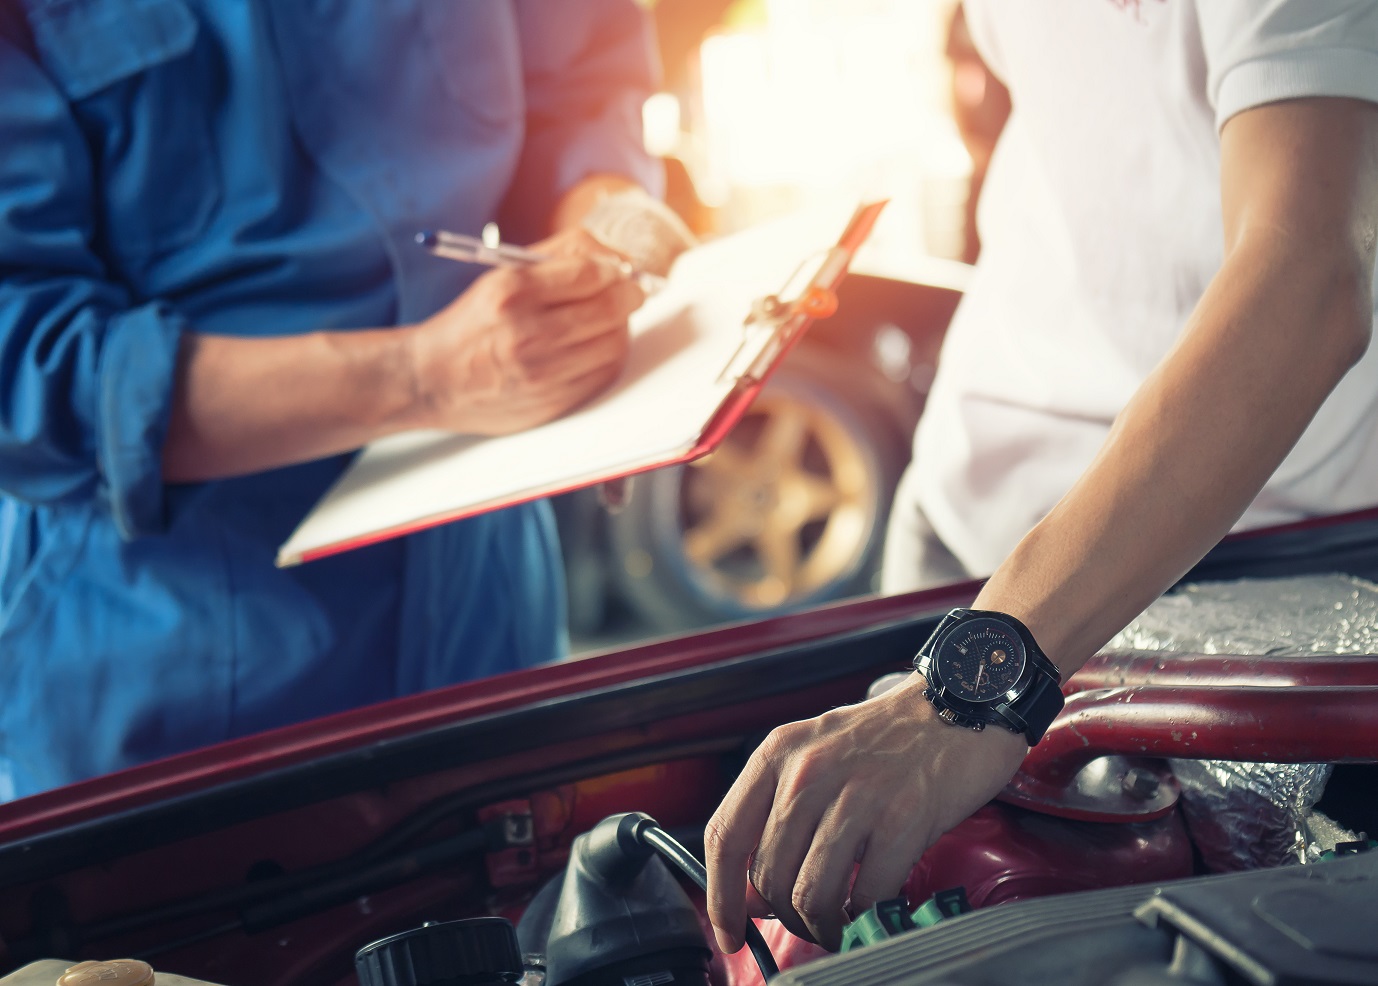 Tips for Spotting Problems with Your Car